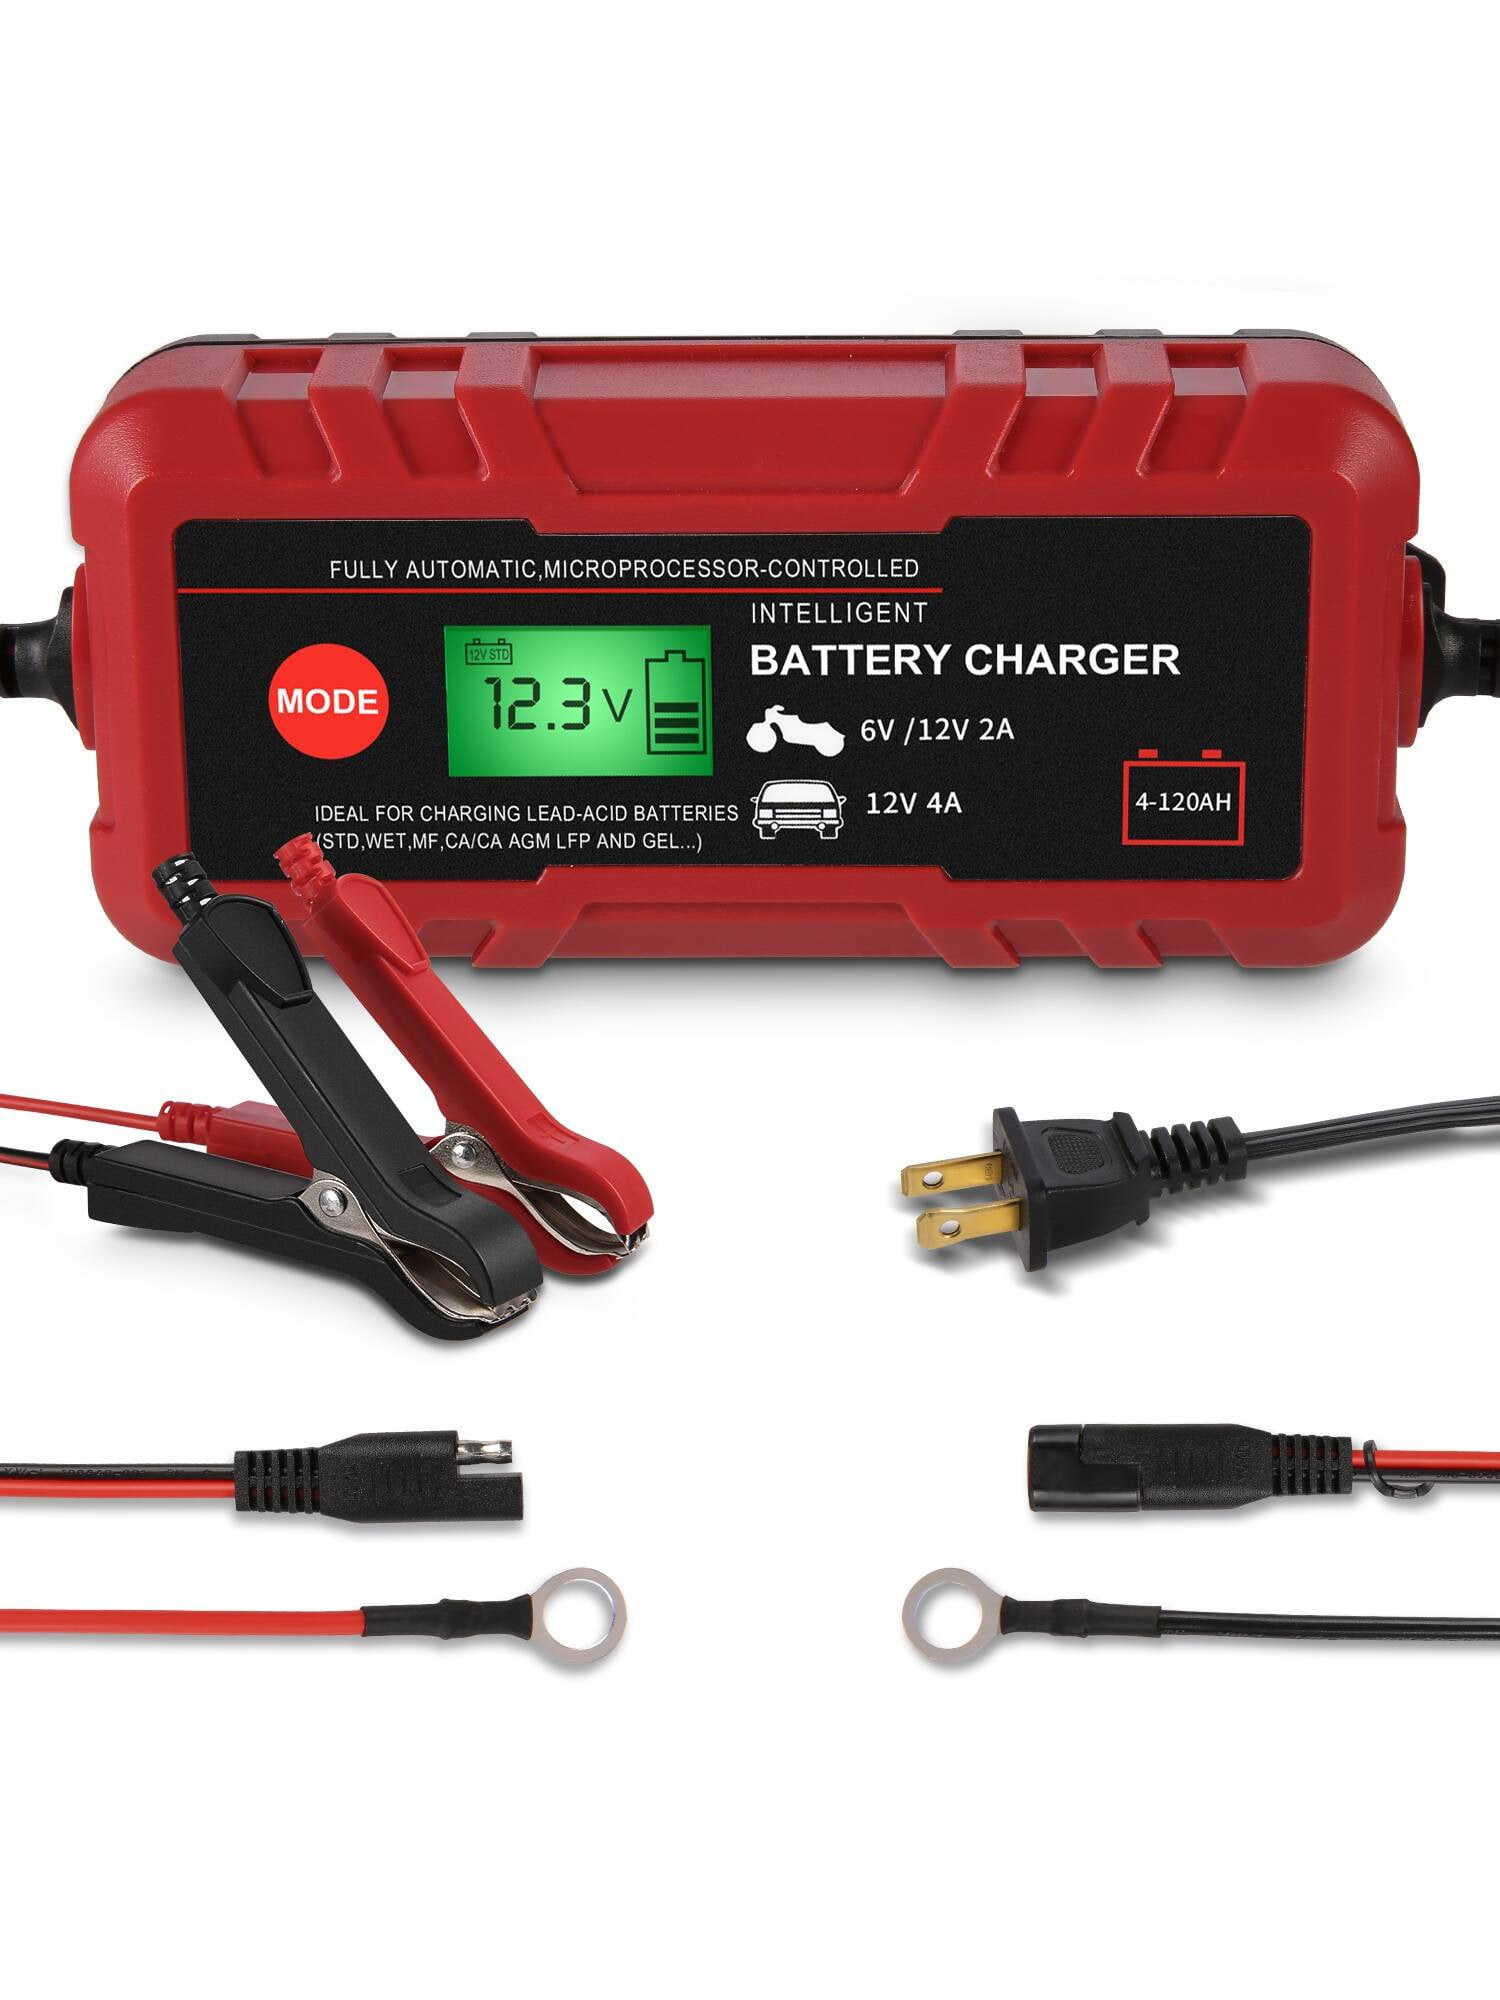 Adnoom 70W 10A Fully Automatic Battery Charger, 6V/12V Lead-Acid